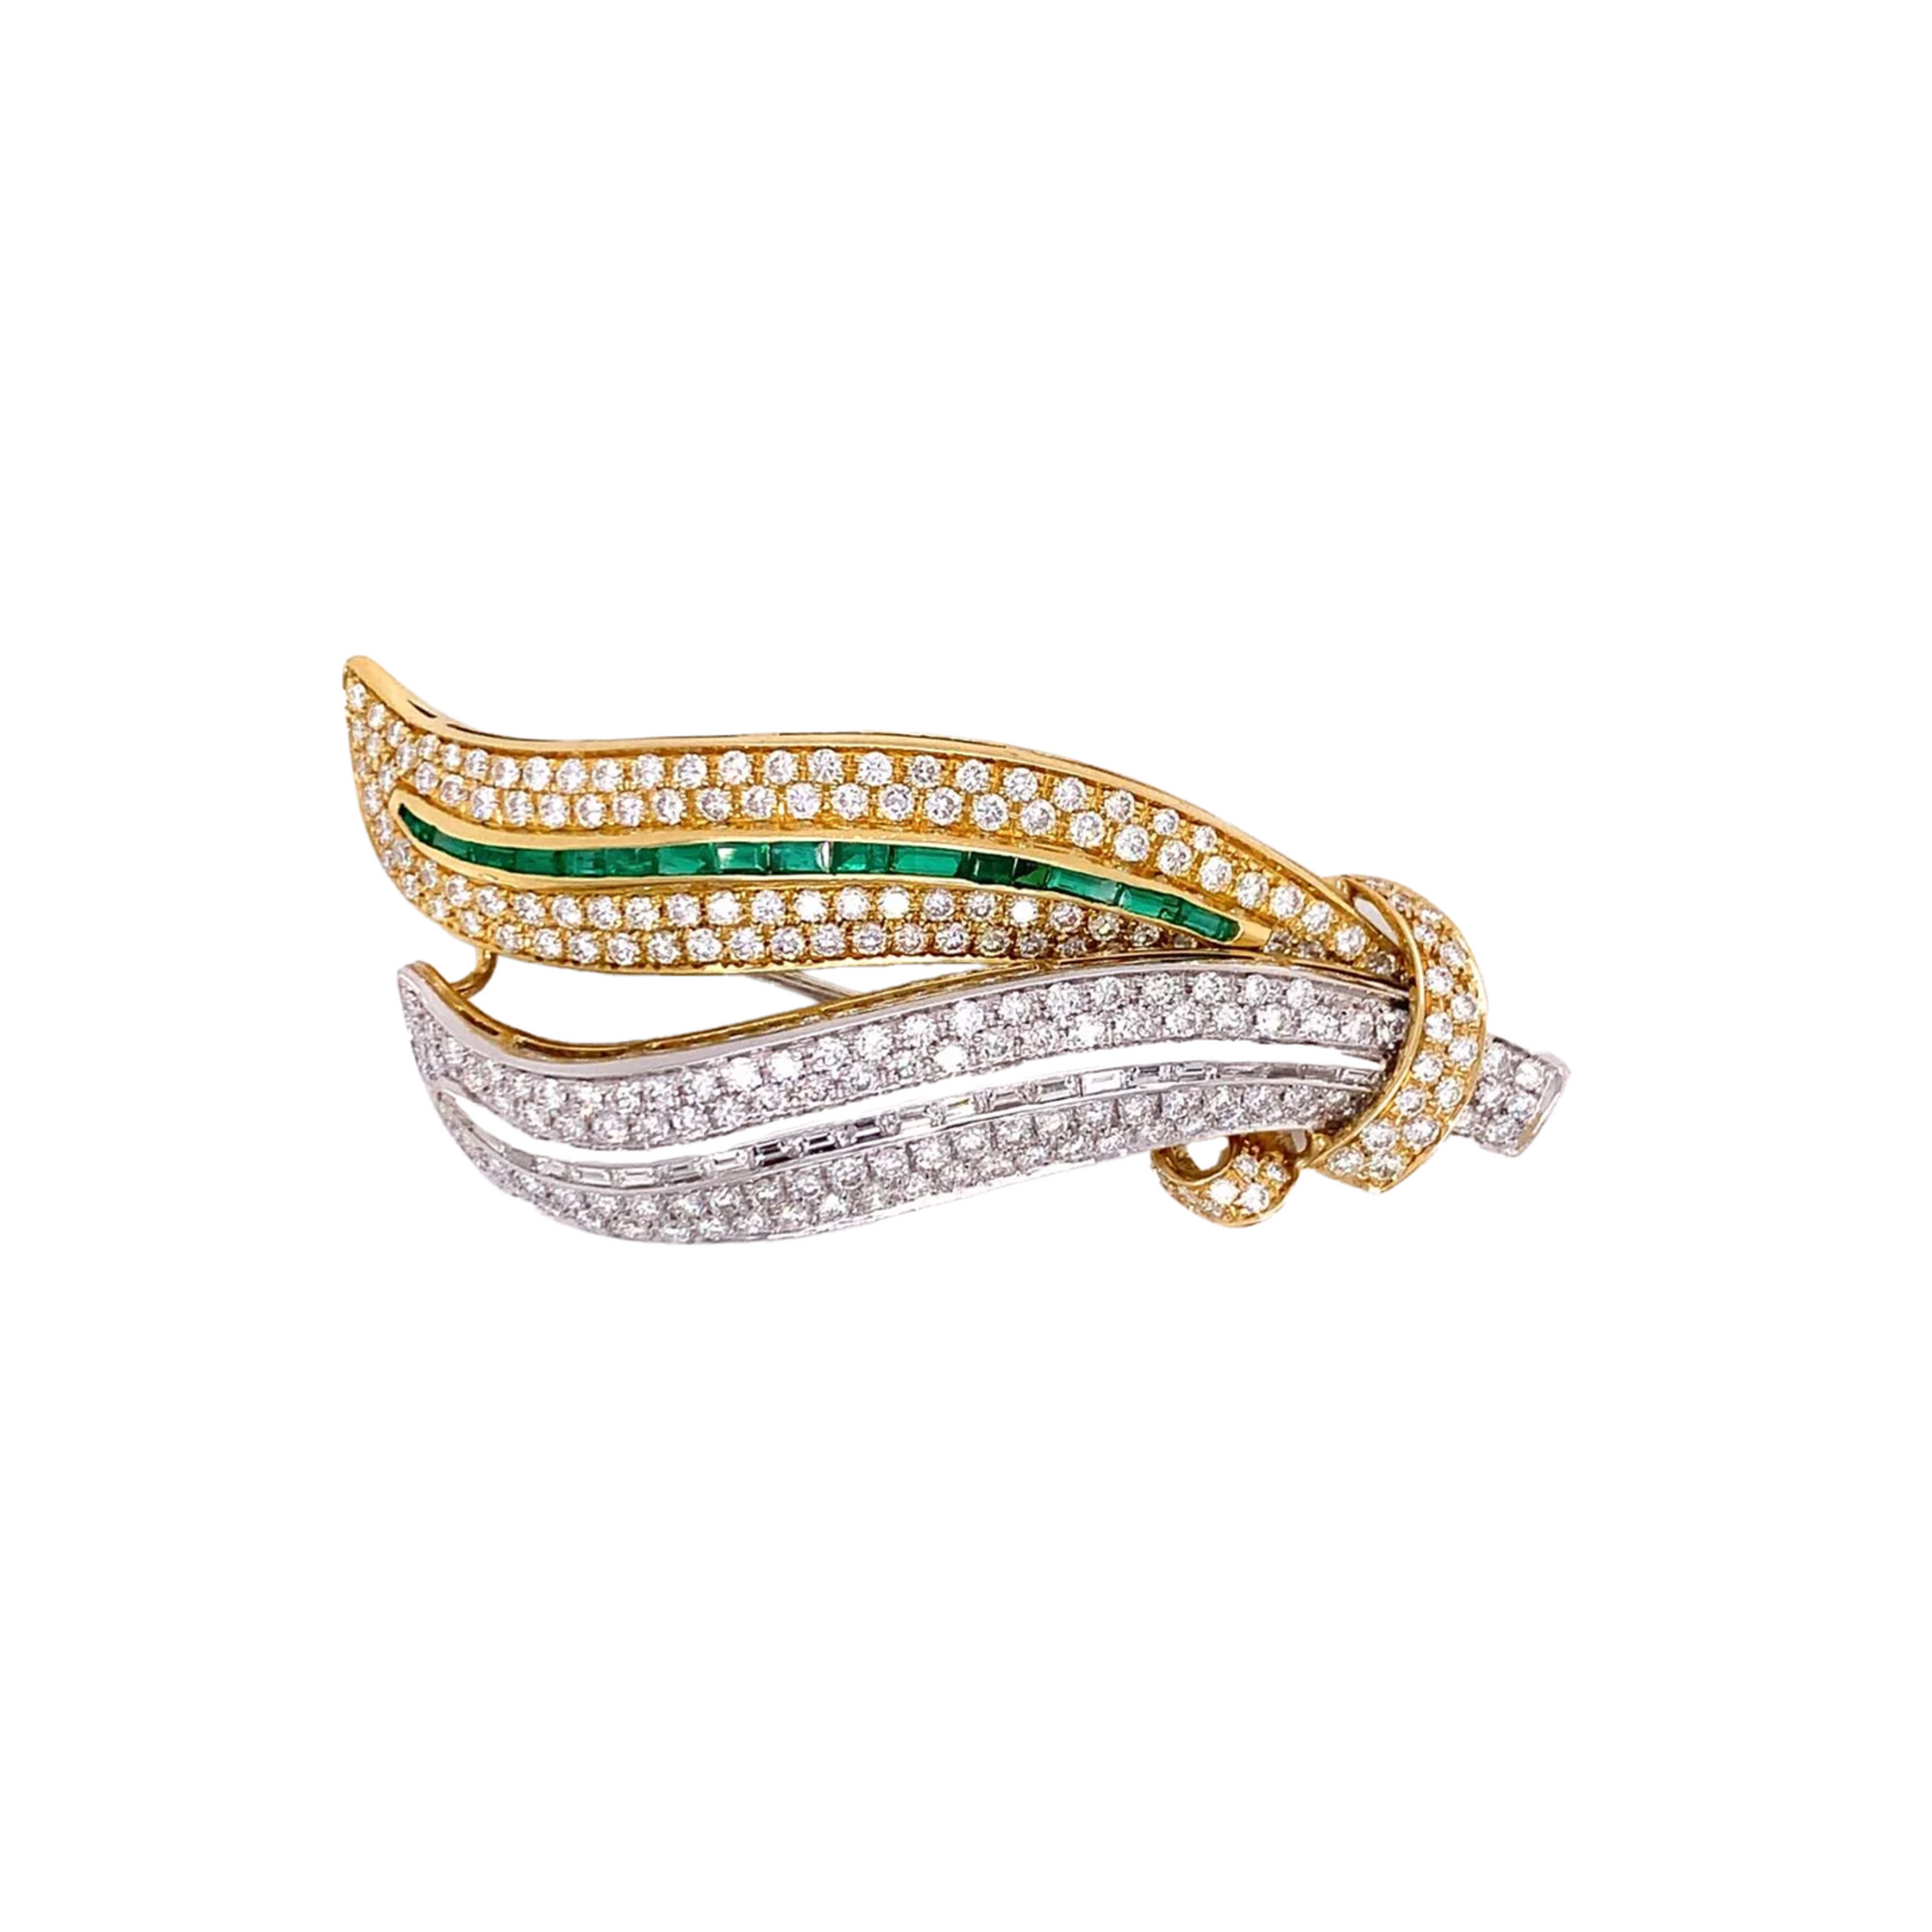 Post-1980s 18KT Yellow Gold Diamond & Emerald Brooch front